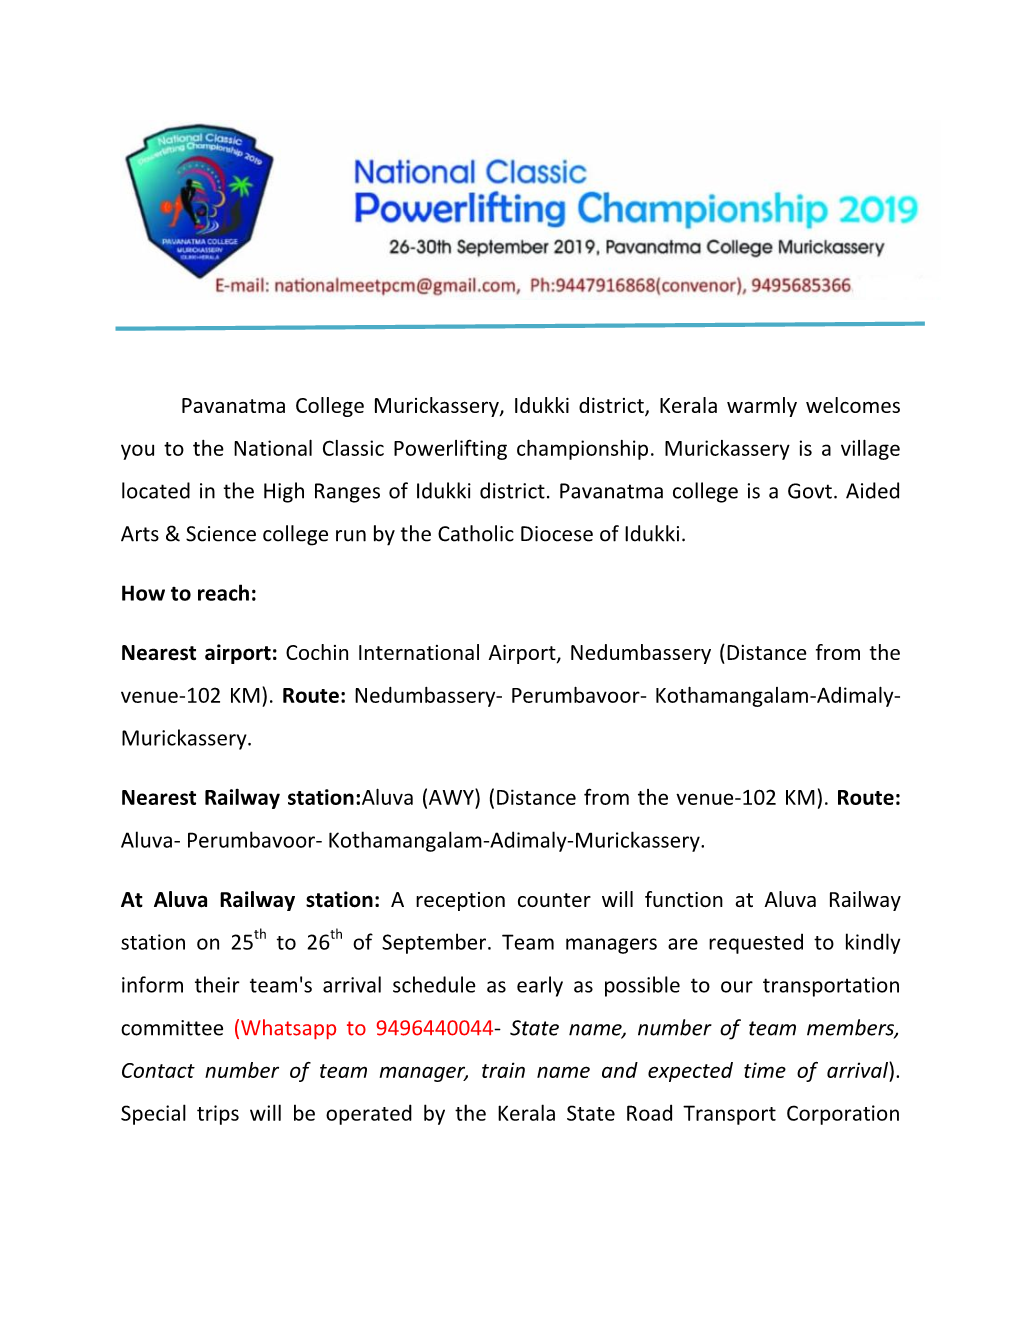 Pavanatma College Murickassery, Idukki District, Kerala Warmly Welcomes You to the National Classic Powerlifting Championship